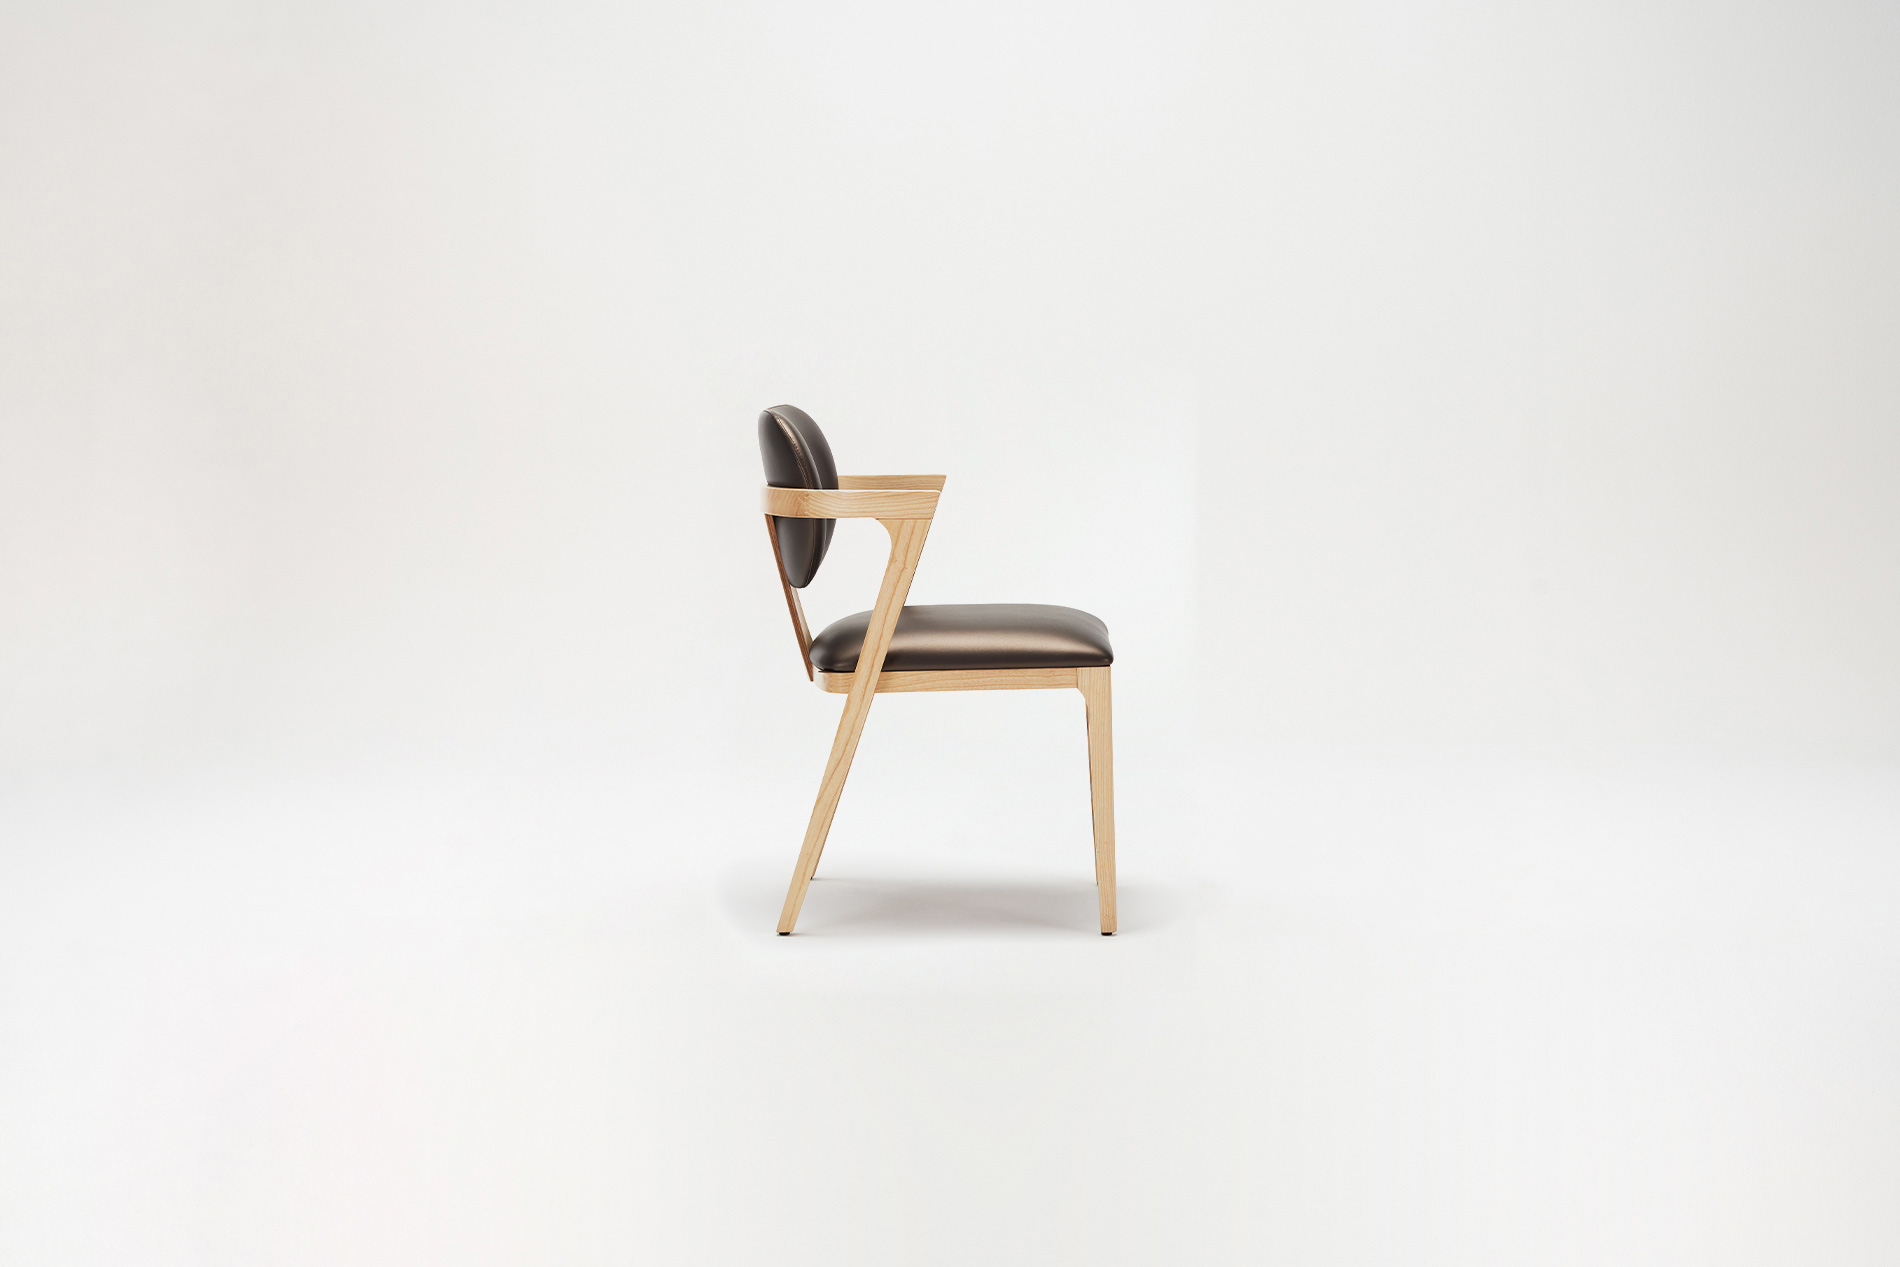 Enriched by wood accents, the design brings a unique aesthetic to spaces.VEEZY ARMCHAIR